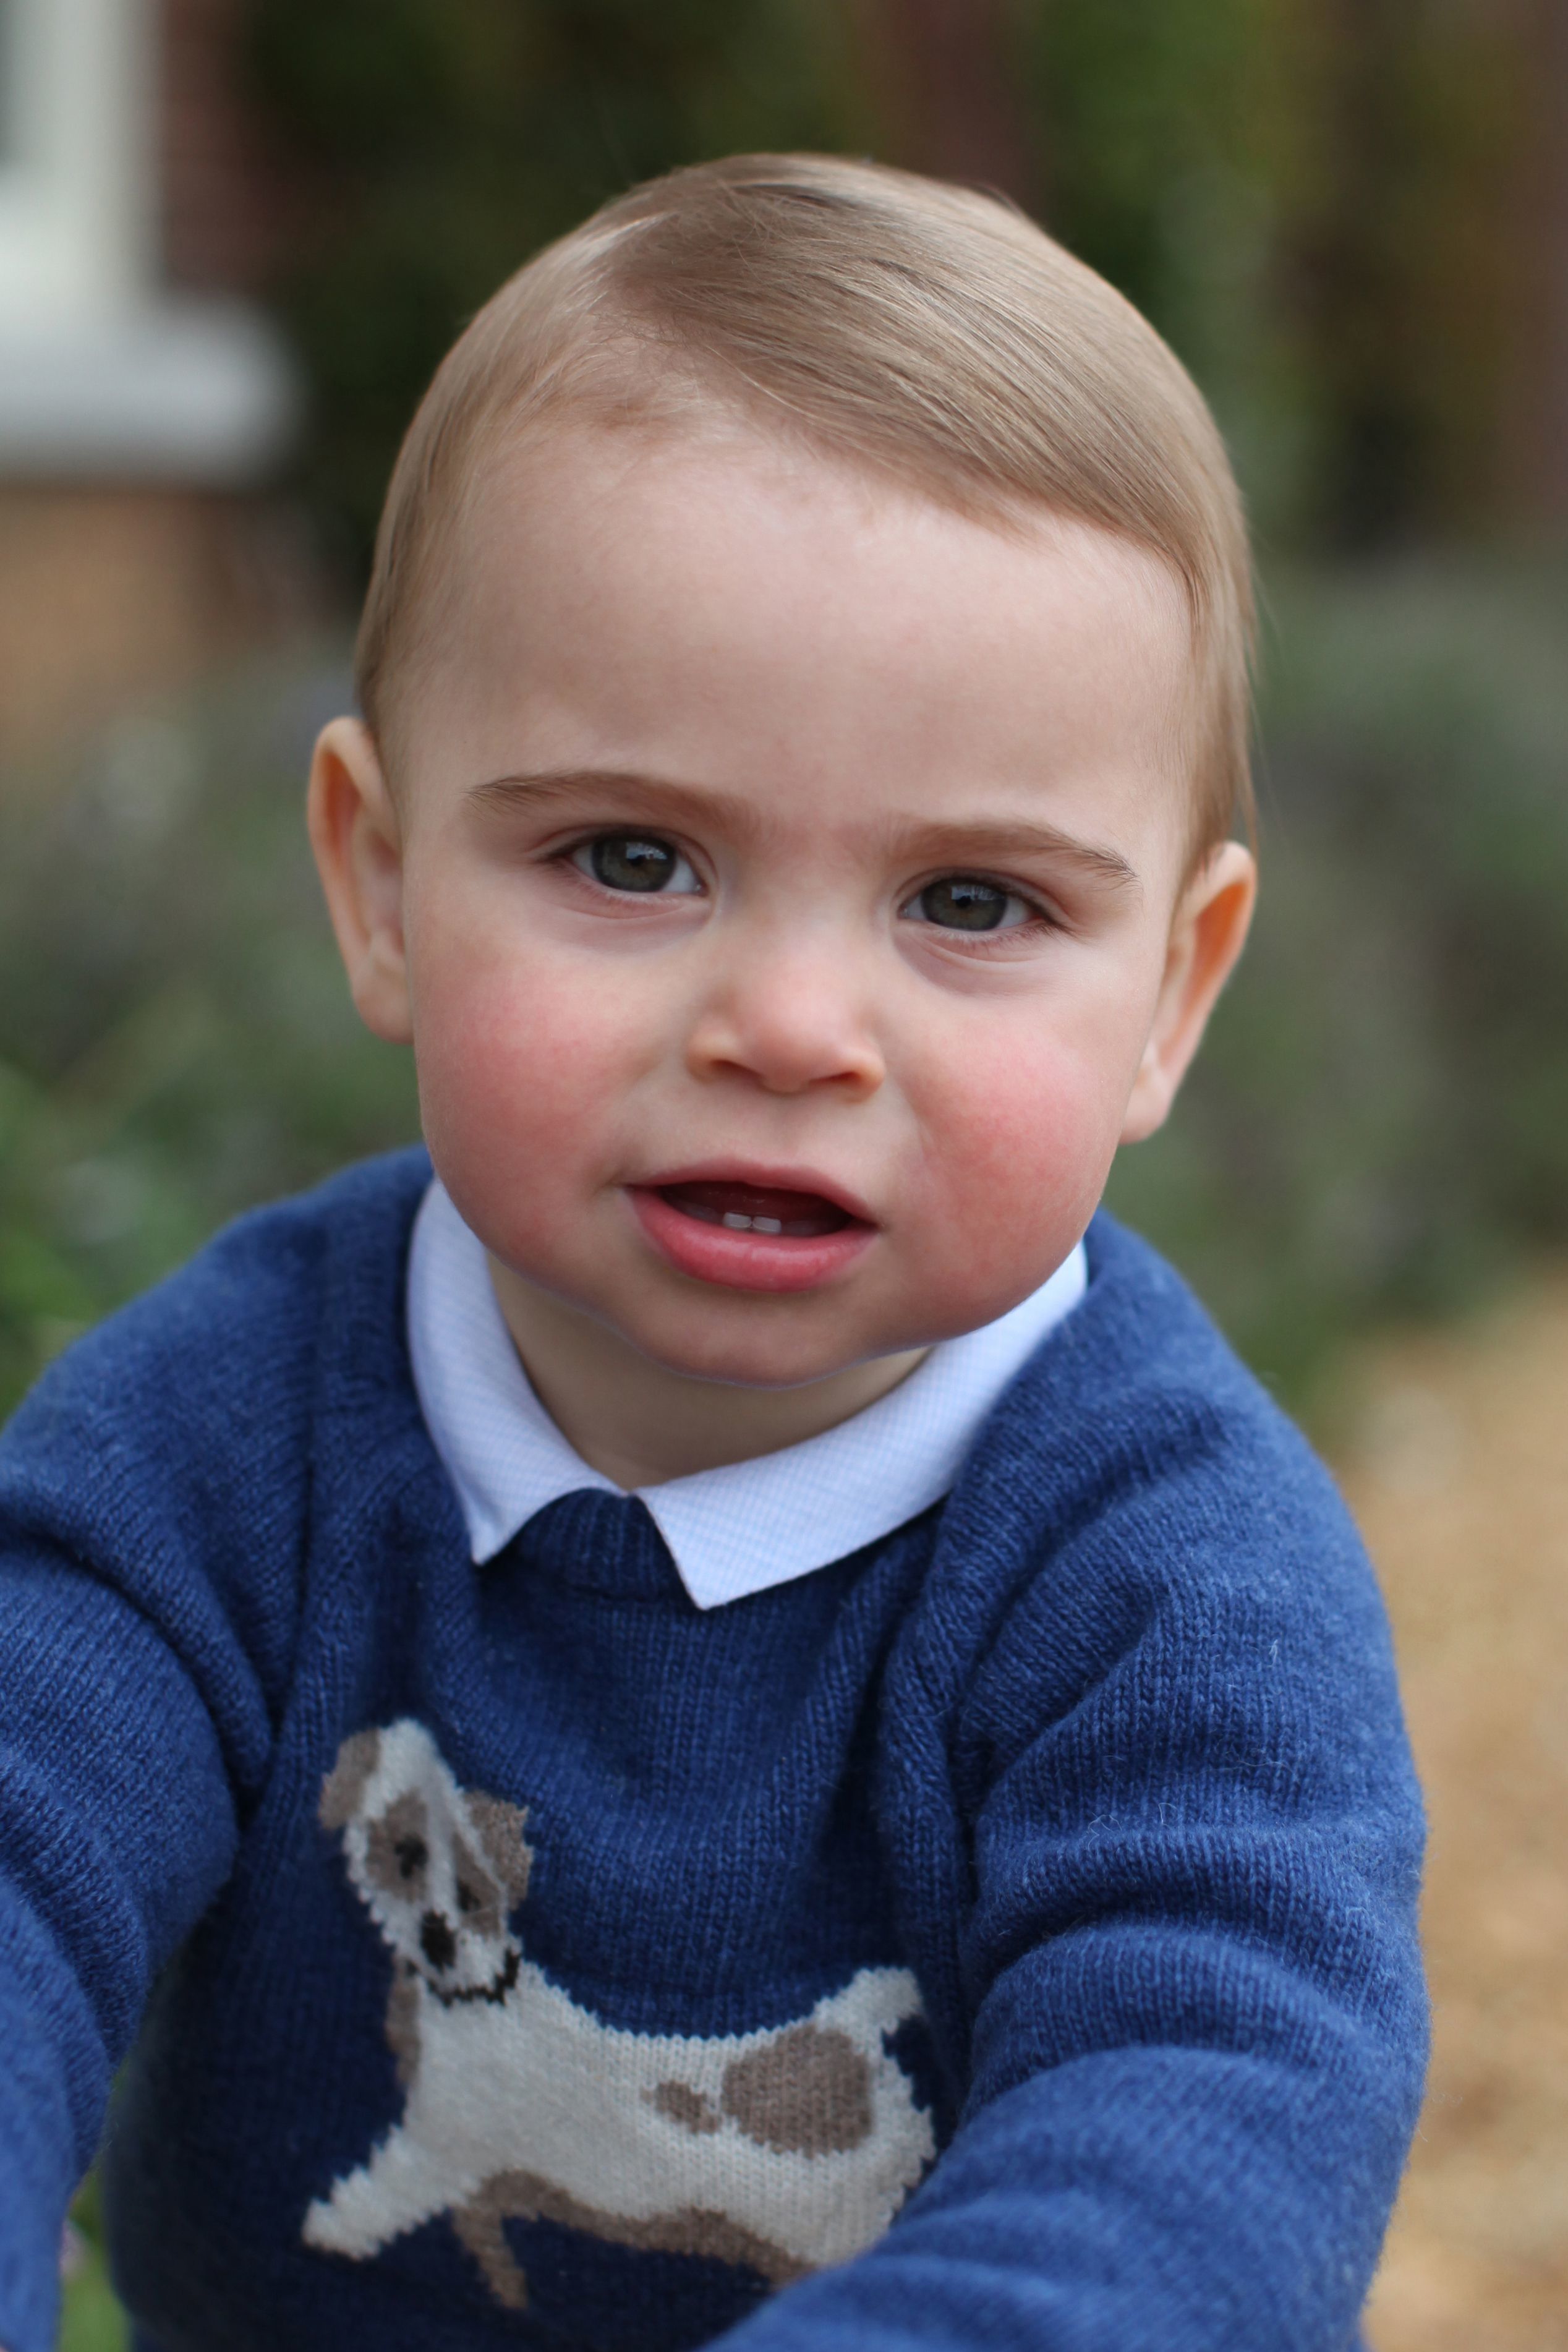 <p><a href="https://www.wonderwall.com/celebrity/profiles/overview/duchess-kate-1356.article">Duchess Kate</a> shot this portrait of Prince Louis at their country home in Norfolk, England, in April 2019 to <a href="https://www.wonderwall.com/celebrity/photos/icymi-royals-news-you-need-know-april-2019-3019359.gallery?photoId=1052774">celebrate his 1st birthday</a> on April 23.</p>